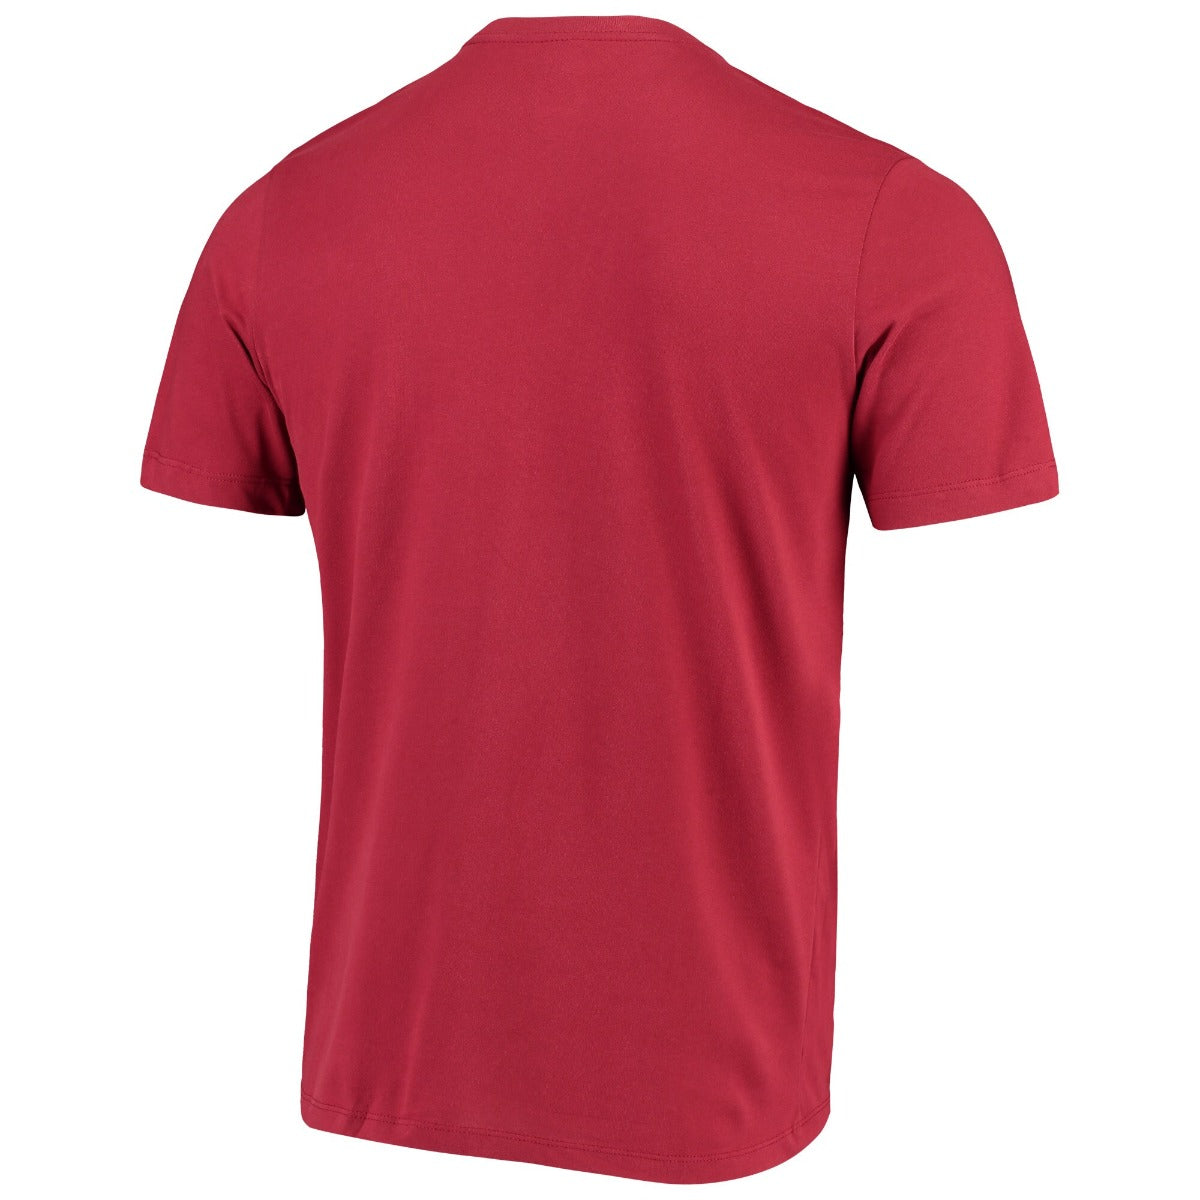 Nike 2019-20 Roma Ground CL Dry-Fit Tee - Red